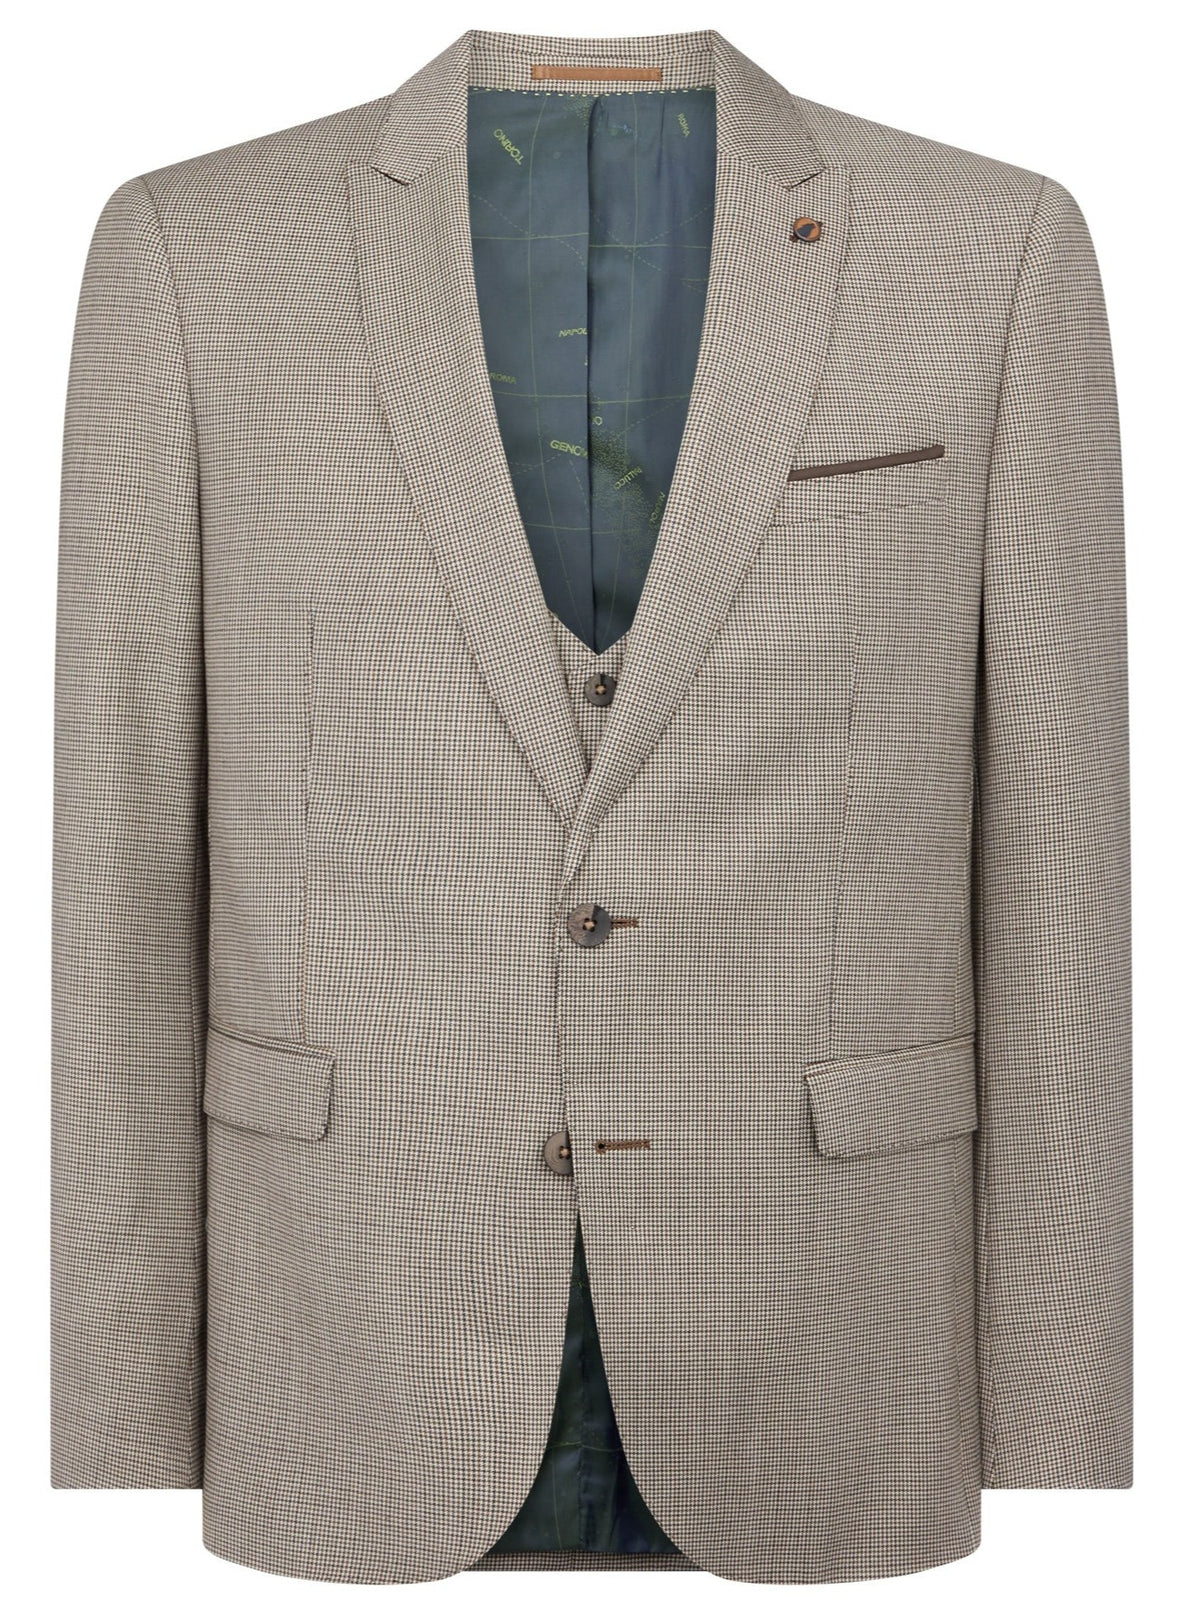 Mario Slim Fit Mix and Match Suit Jacket